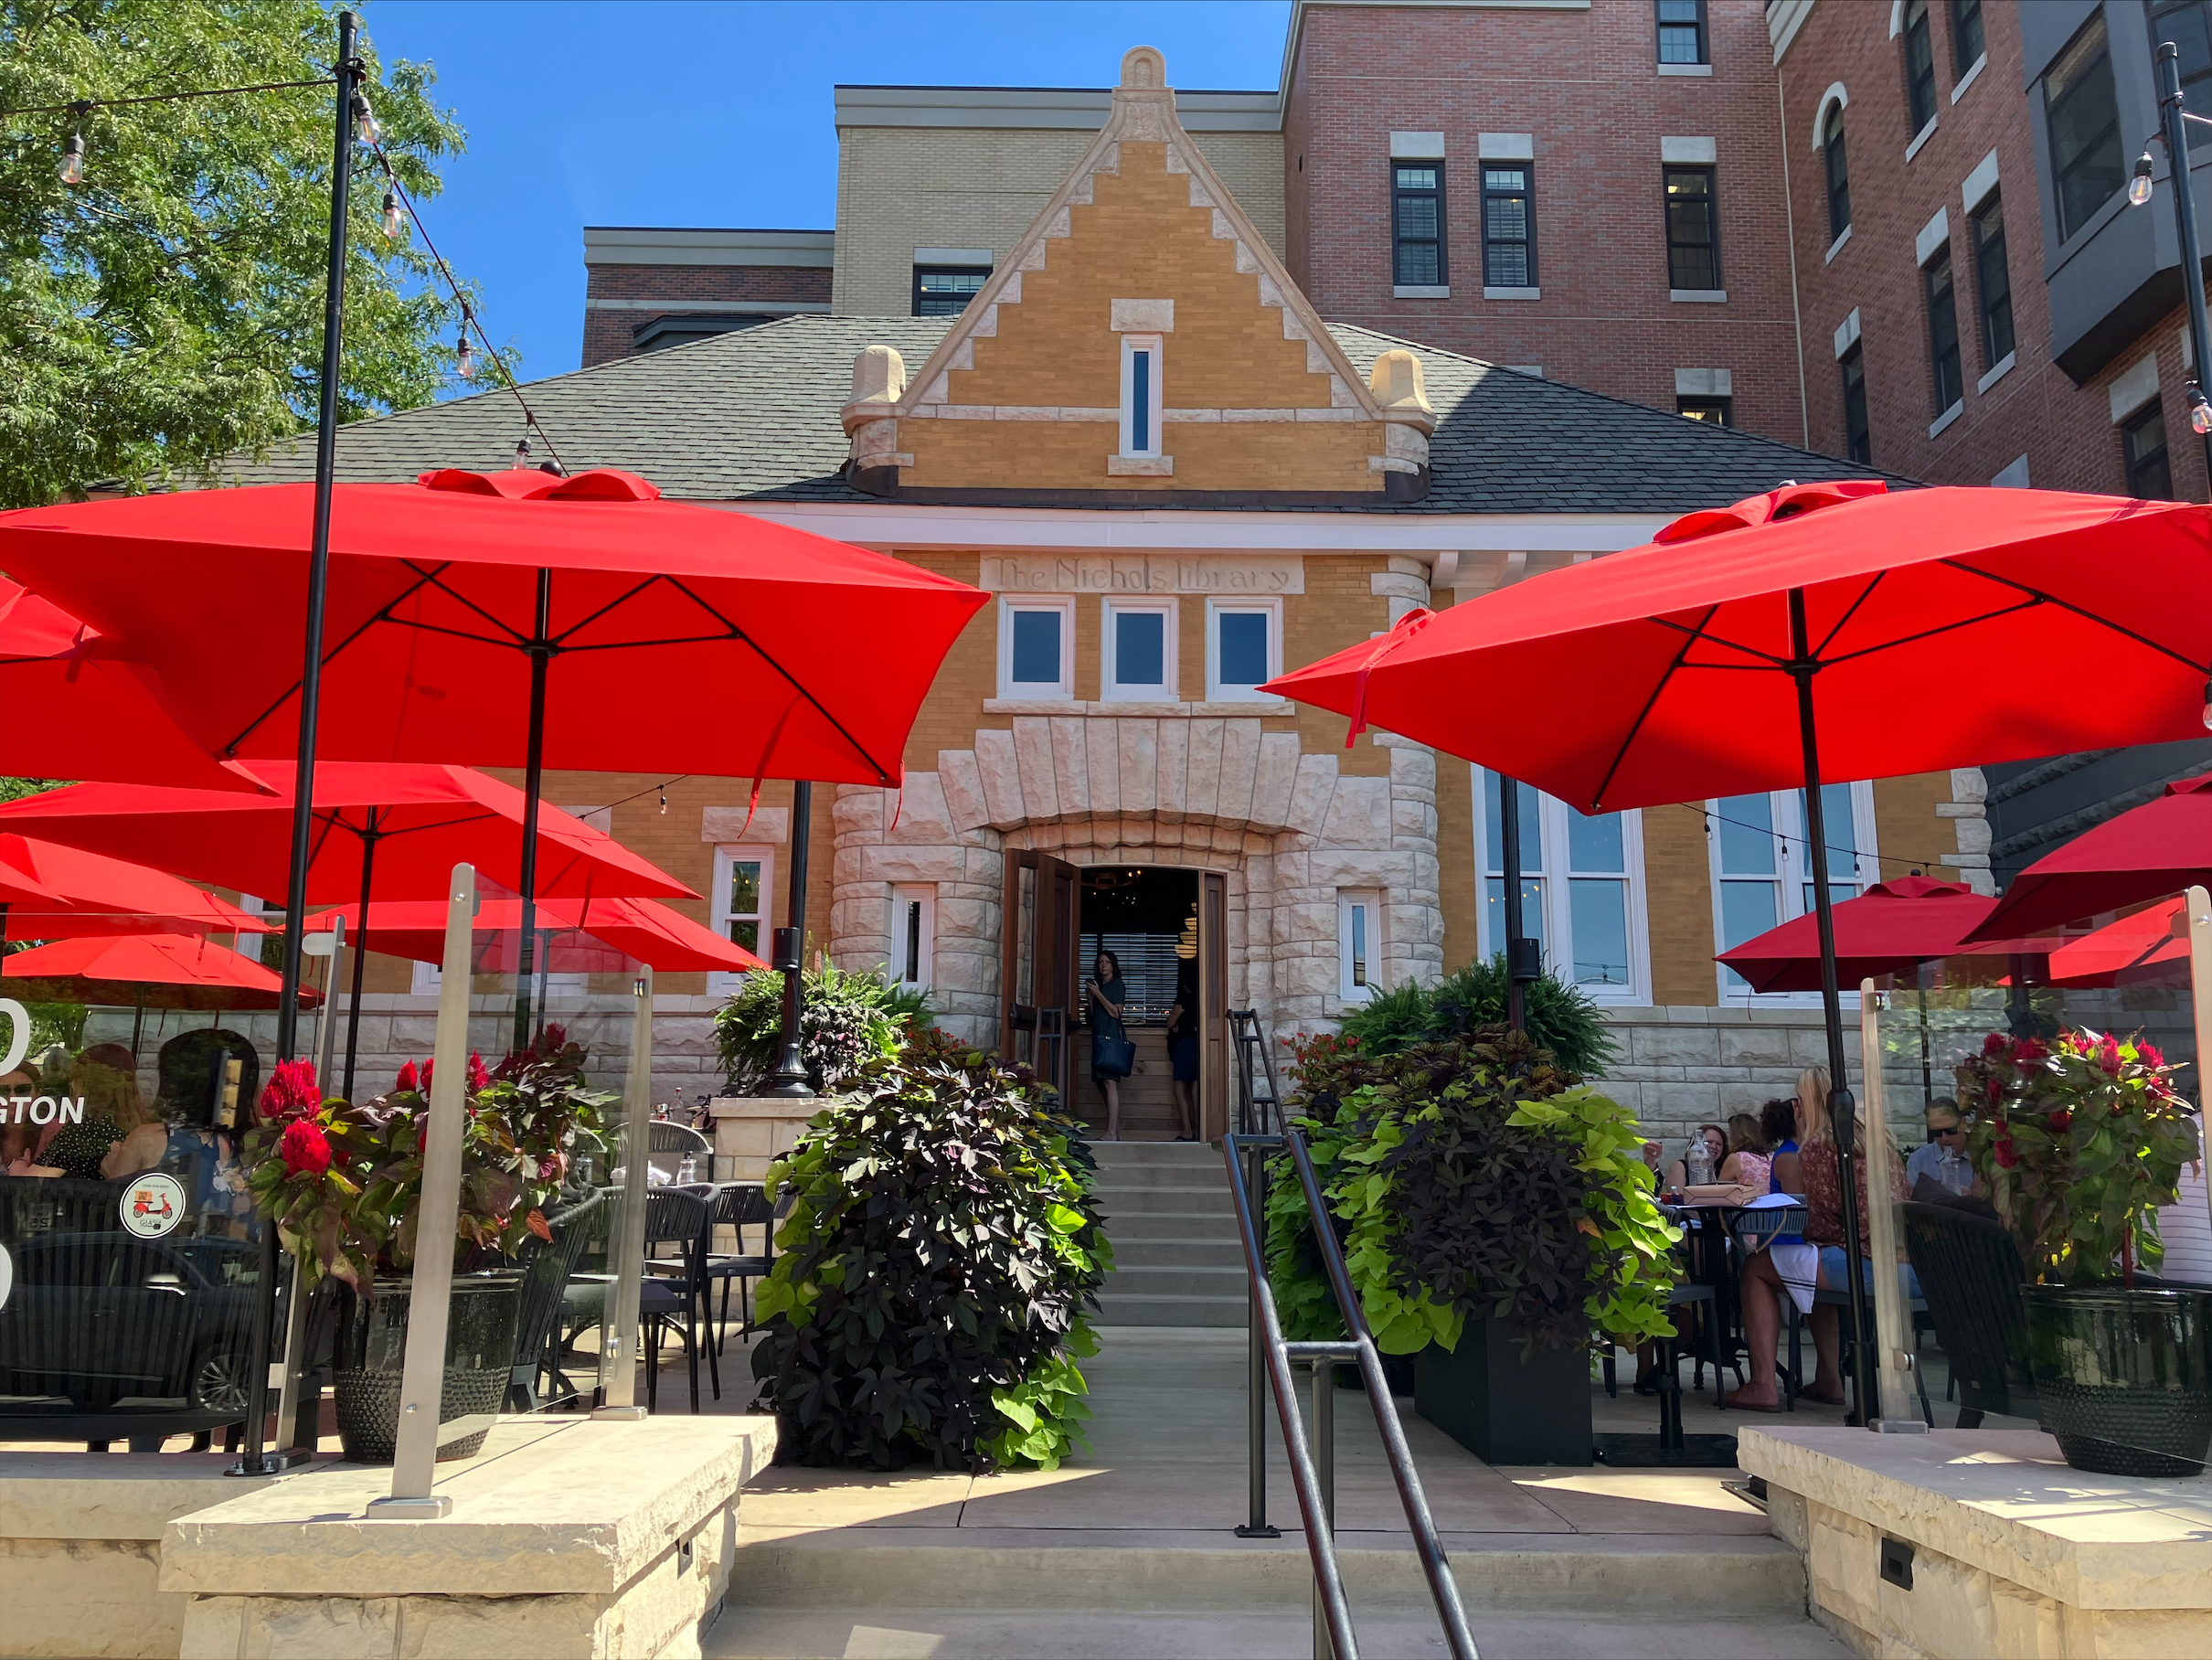 a limestone building, formerly a library, repurposed as a restaurant with tables and red umbrellas in front